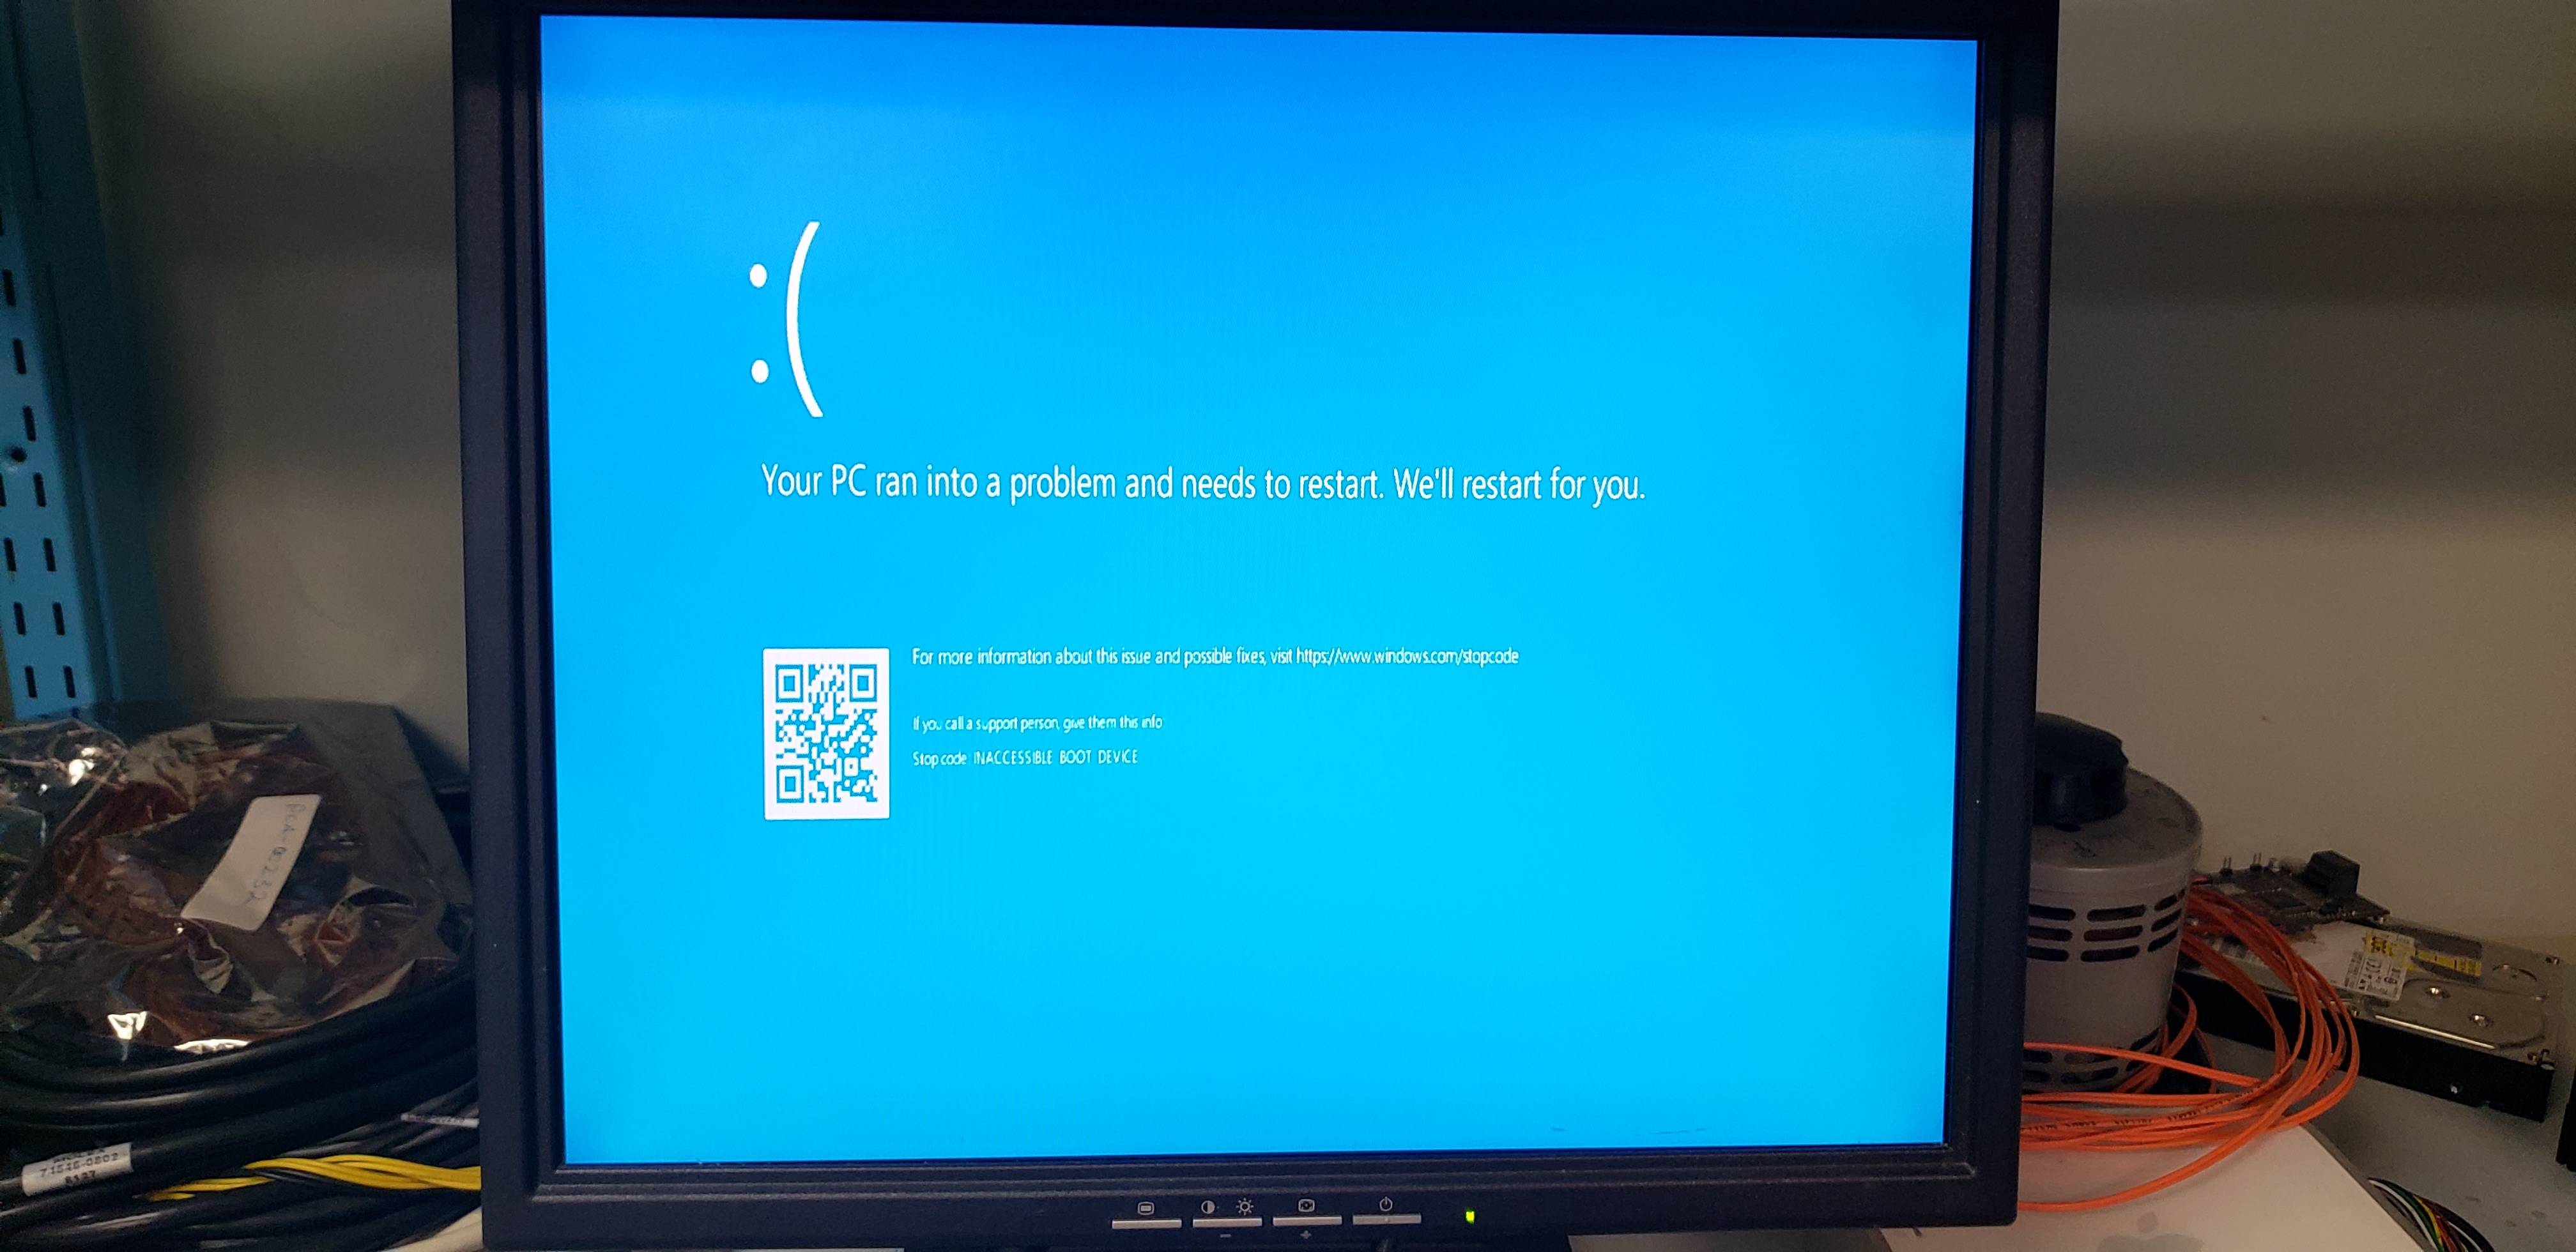 parallels for mac running windows 10 error inacessable boot device